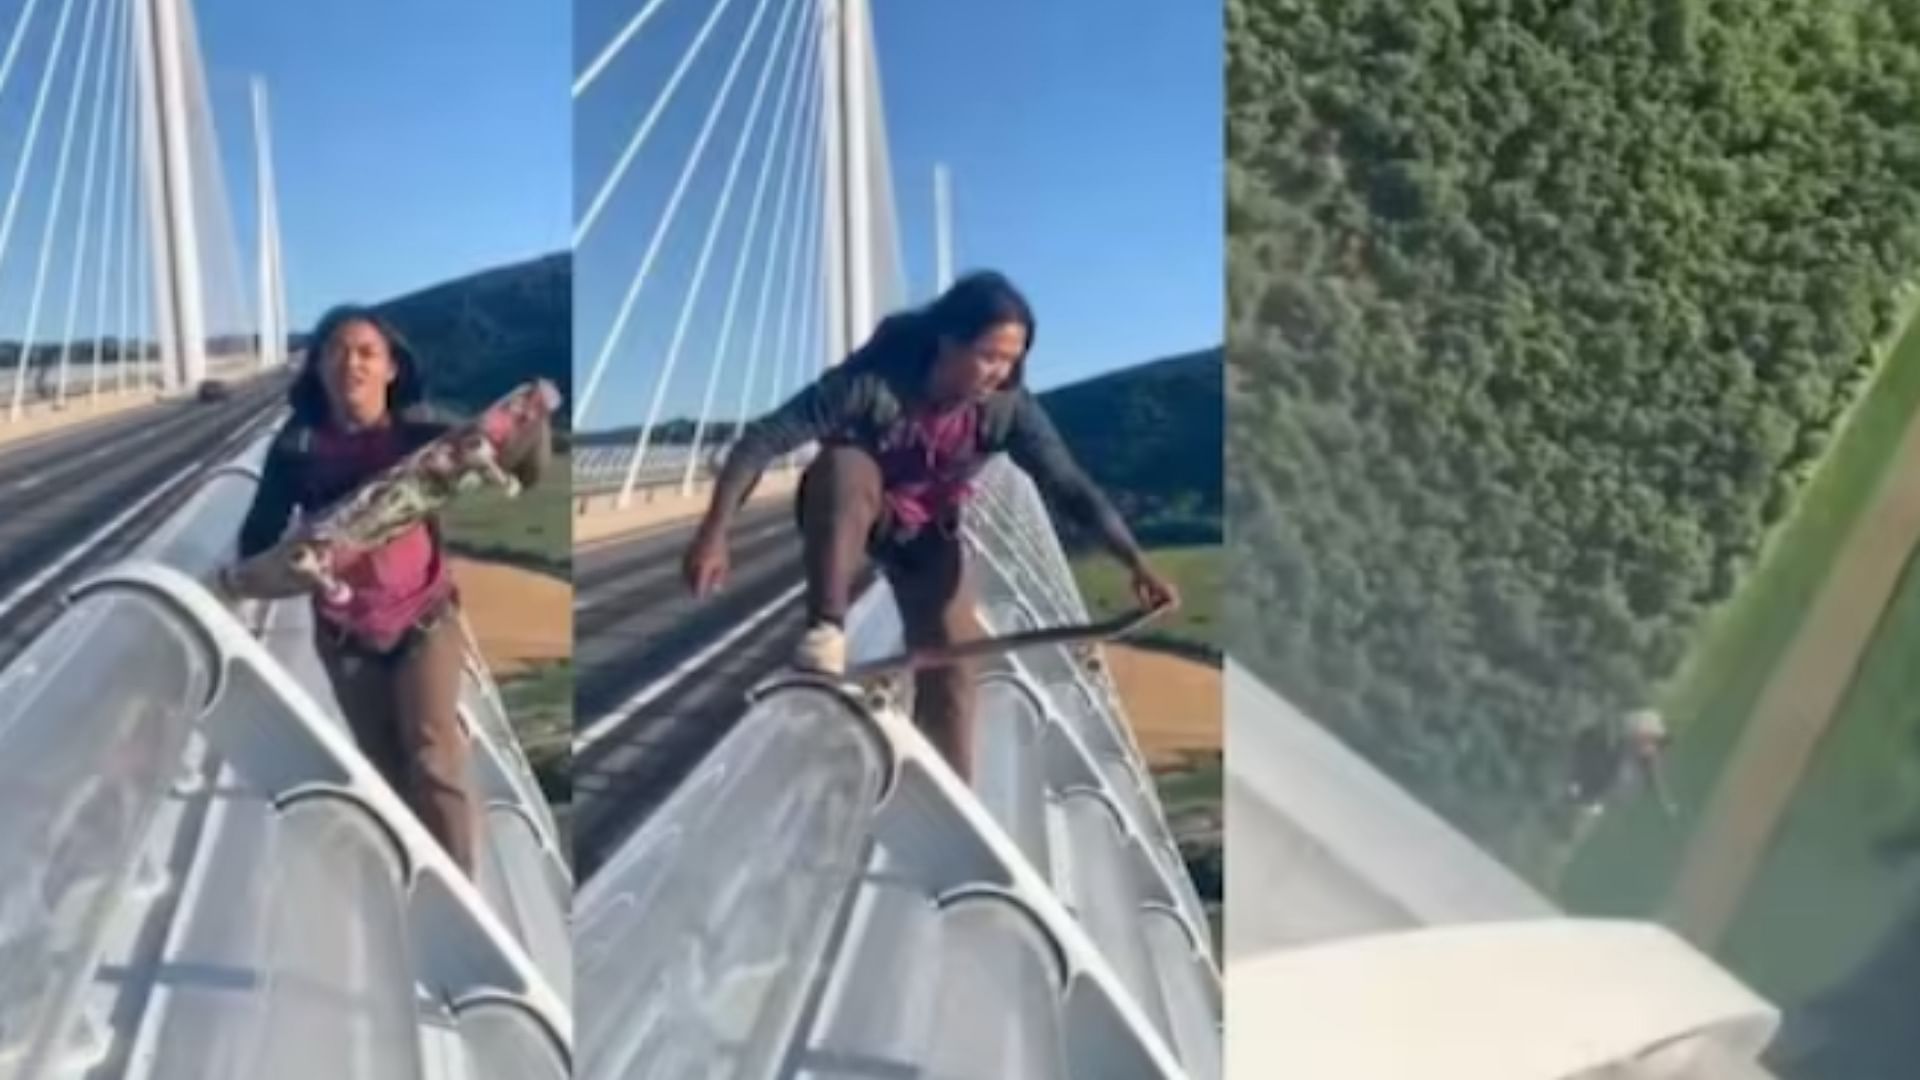 Woman jumped down from the bridge dangerous stunt video viral on social media